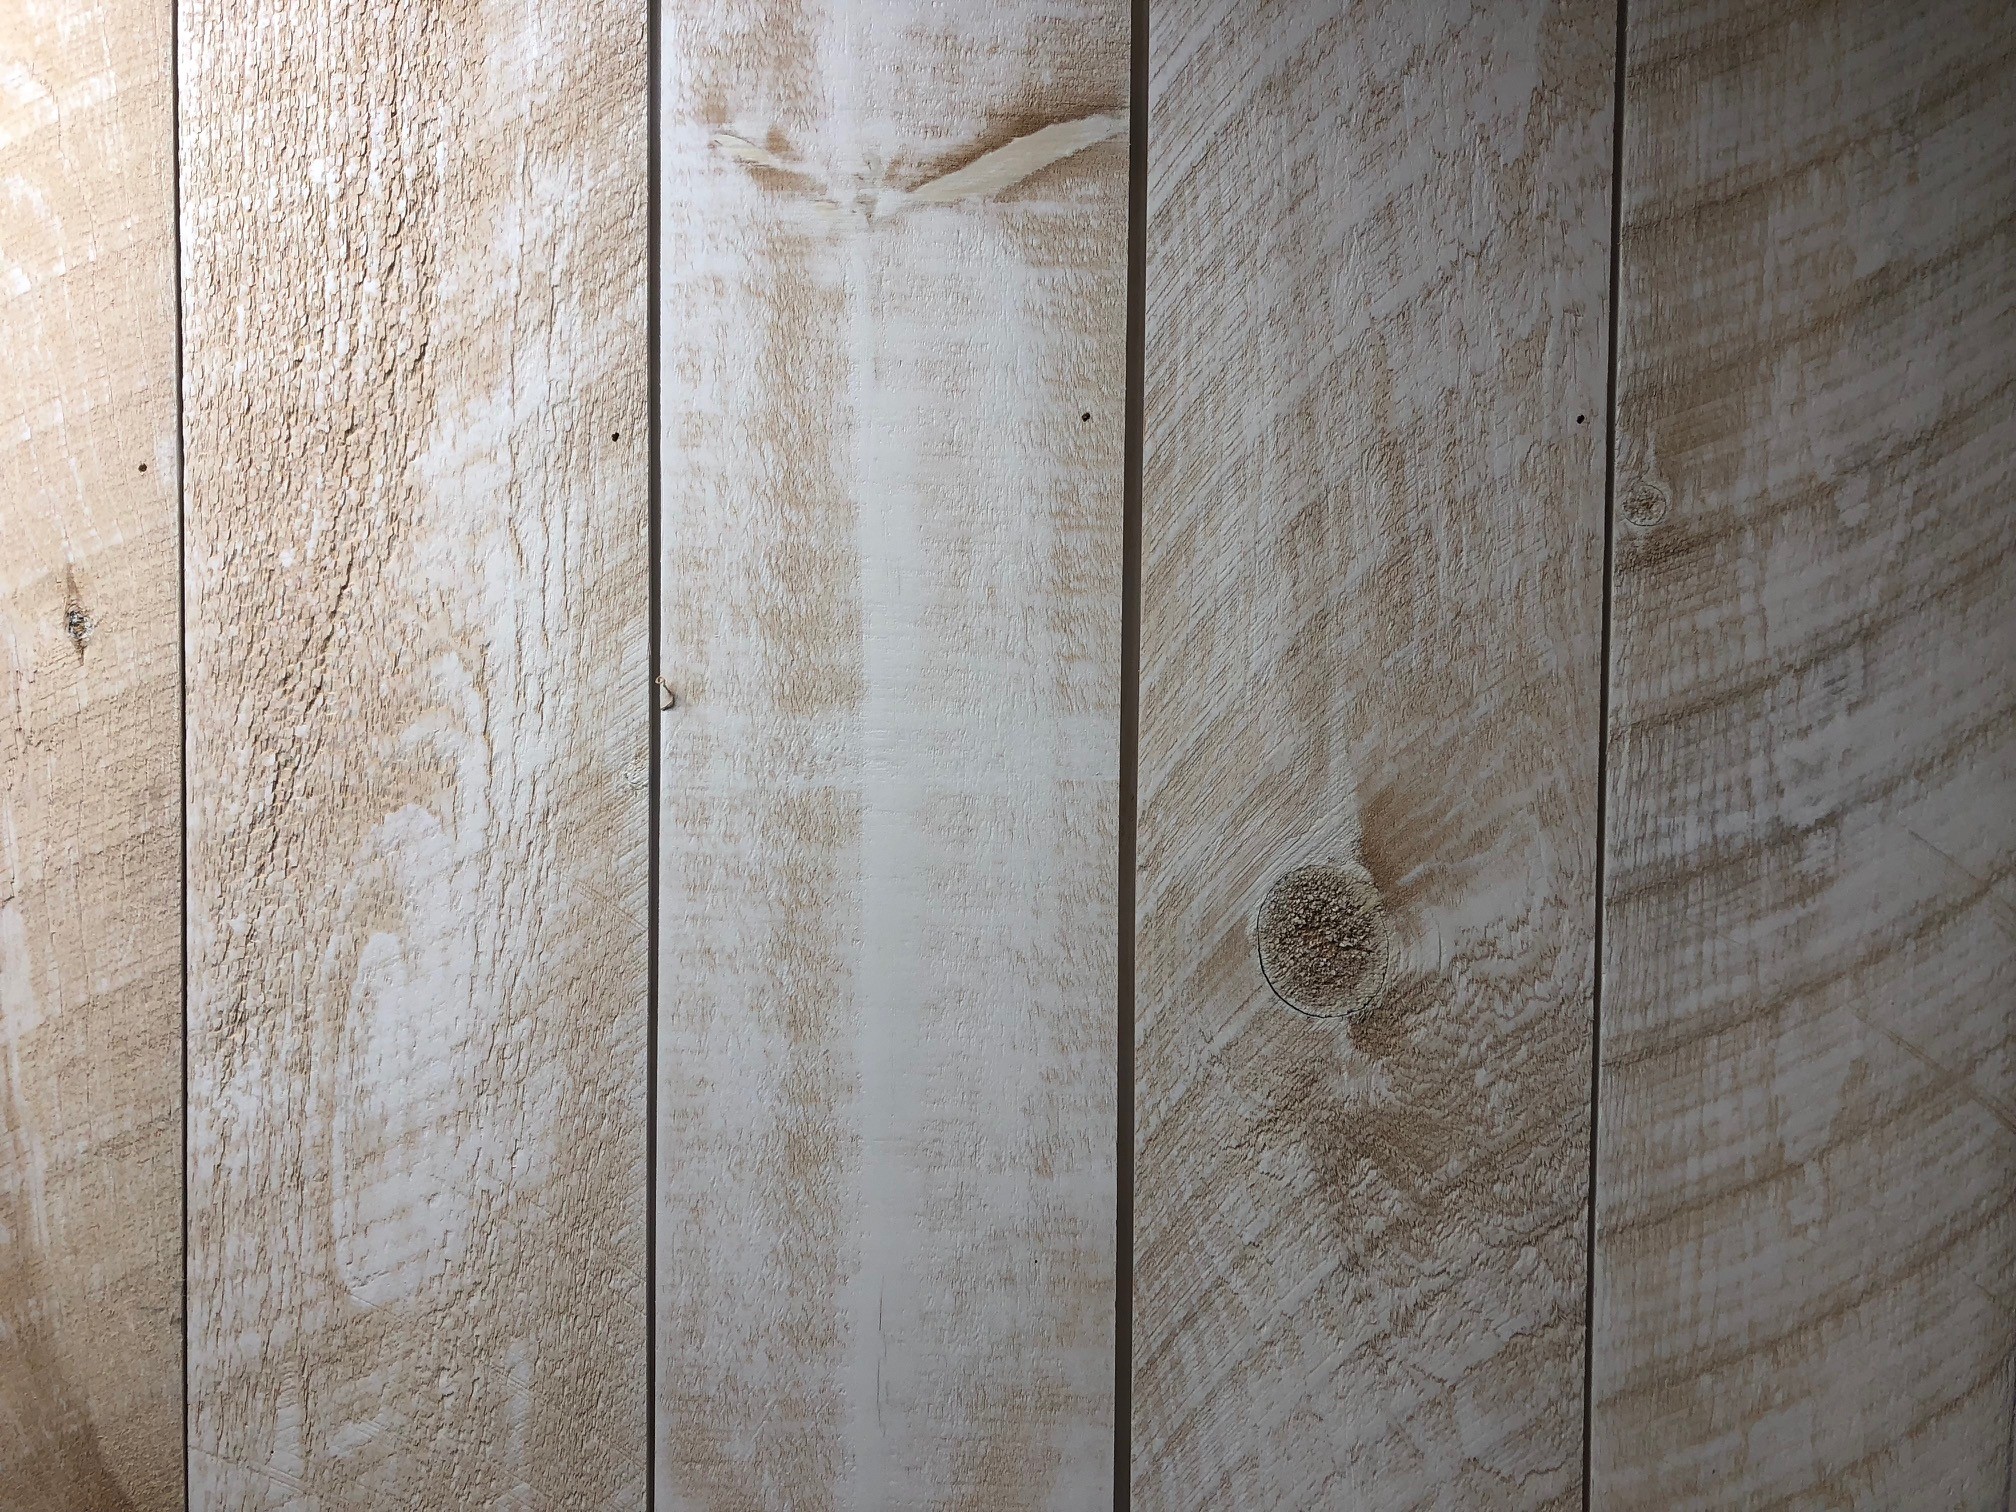 Whats The Difference Between Shiplap And Nickel Gap Wood Siding